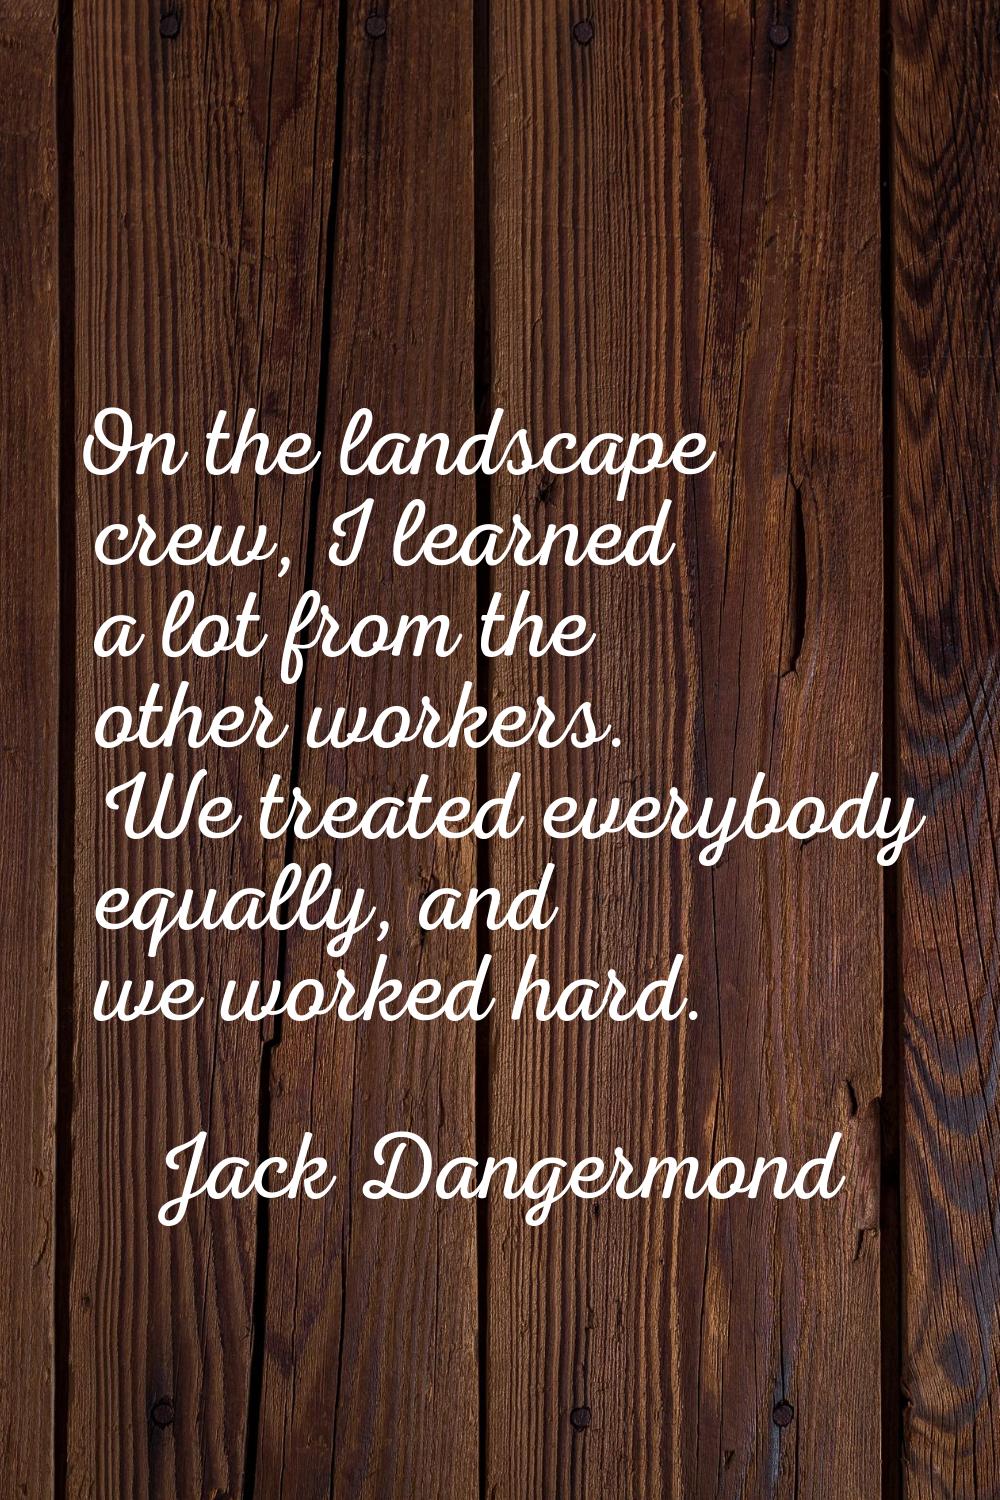 On the landscape crew, I learned a lot from the other workers. We treated everybody equally, and we